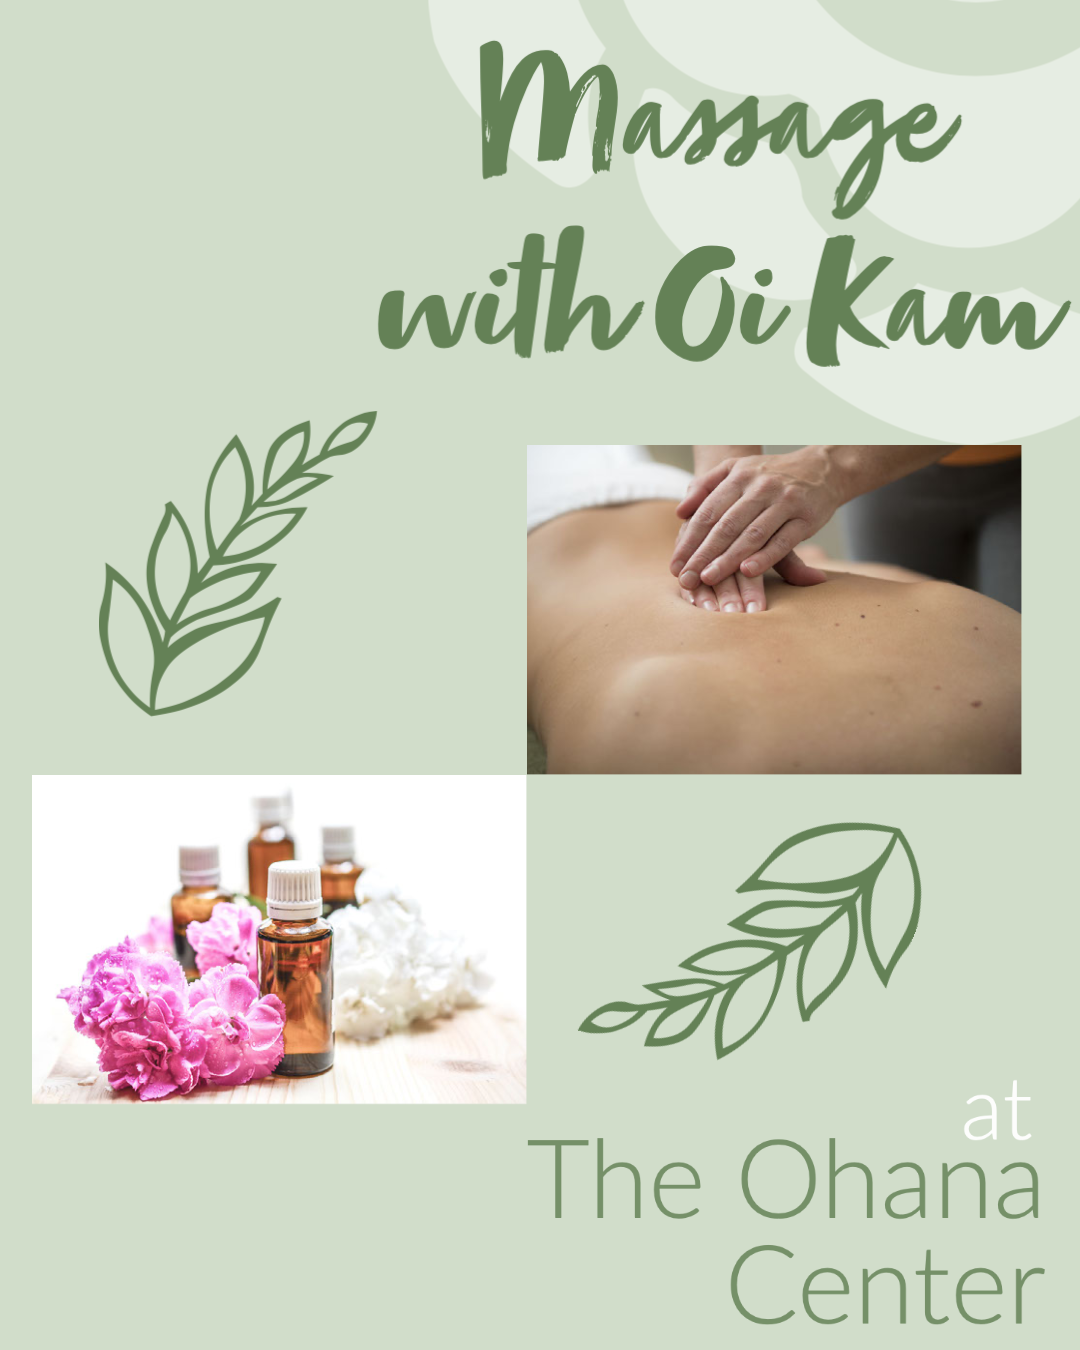 Massages with Oi Kam